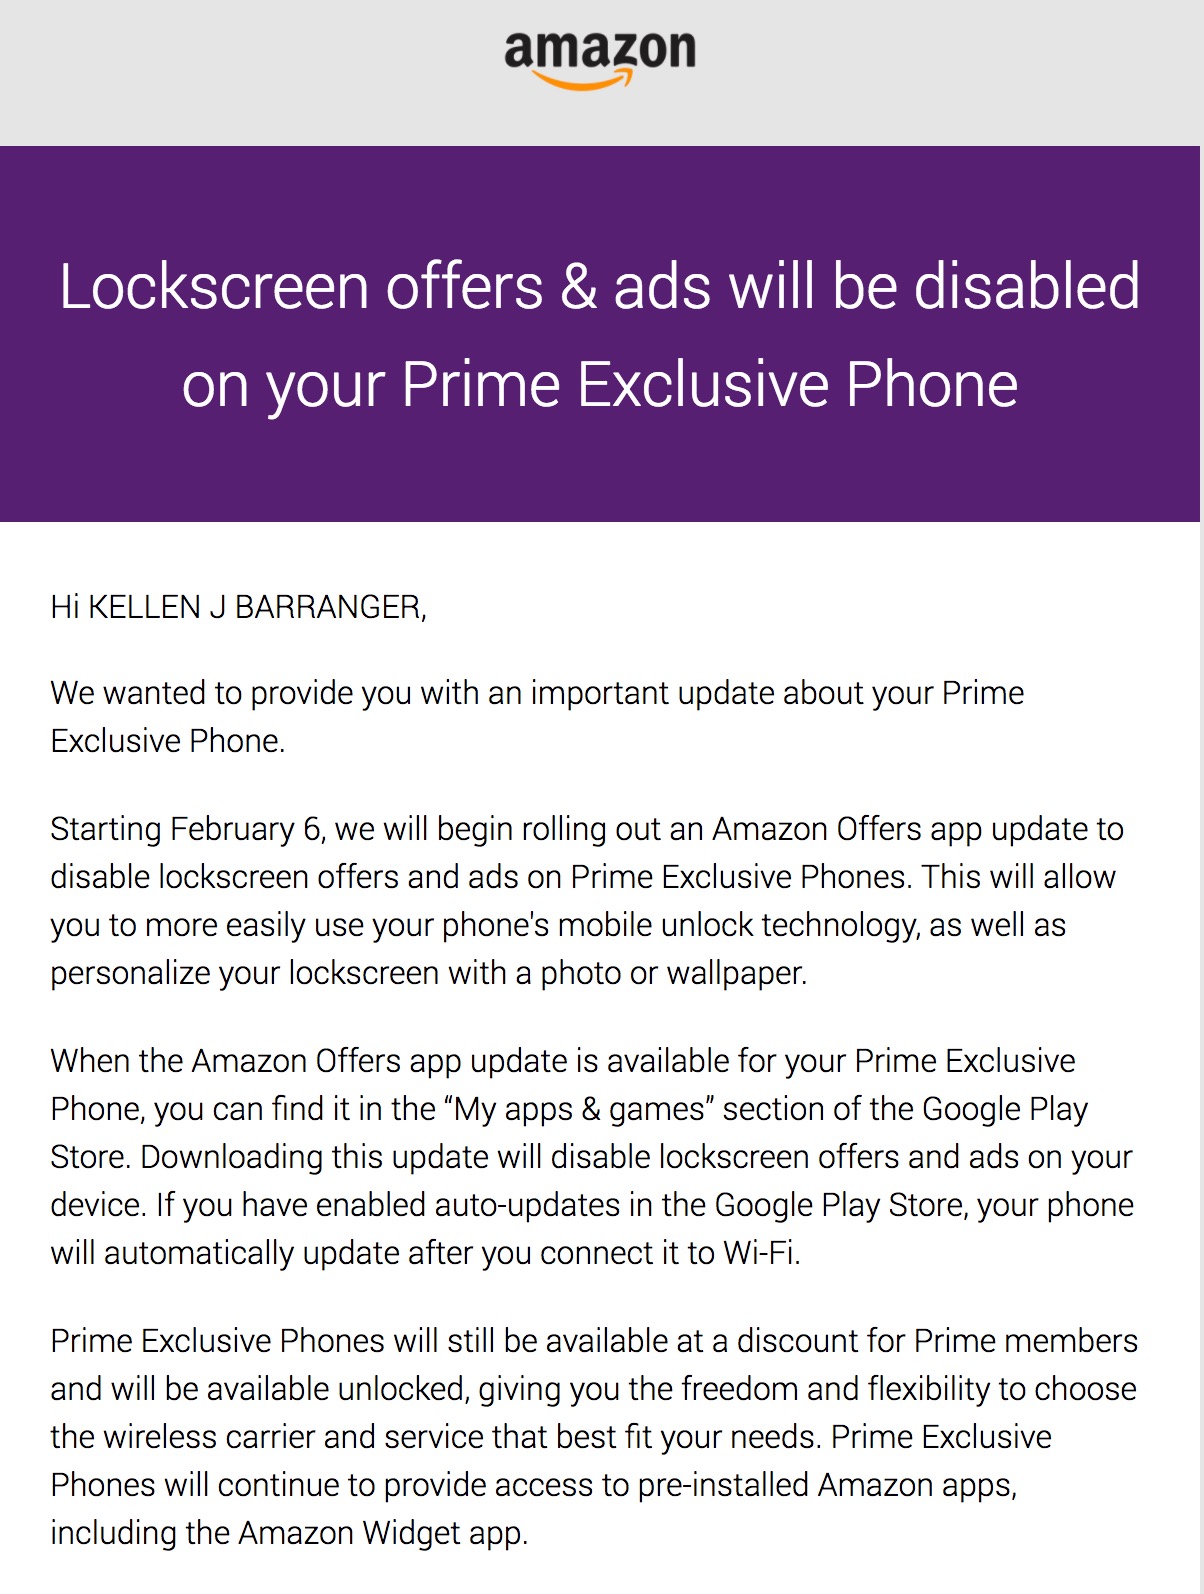 Prime Exclusive Phones Become Better Deal, Update Will